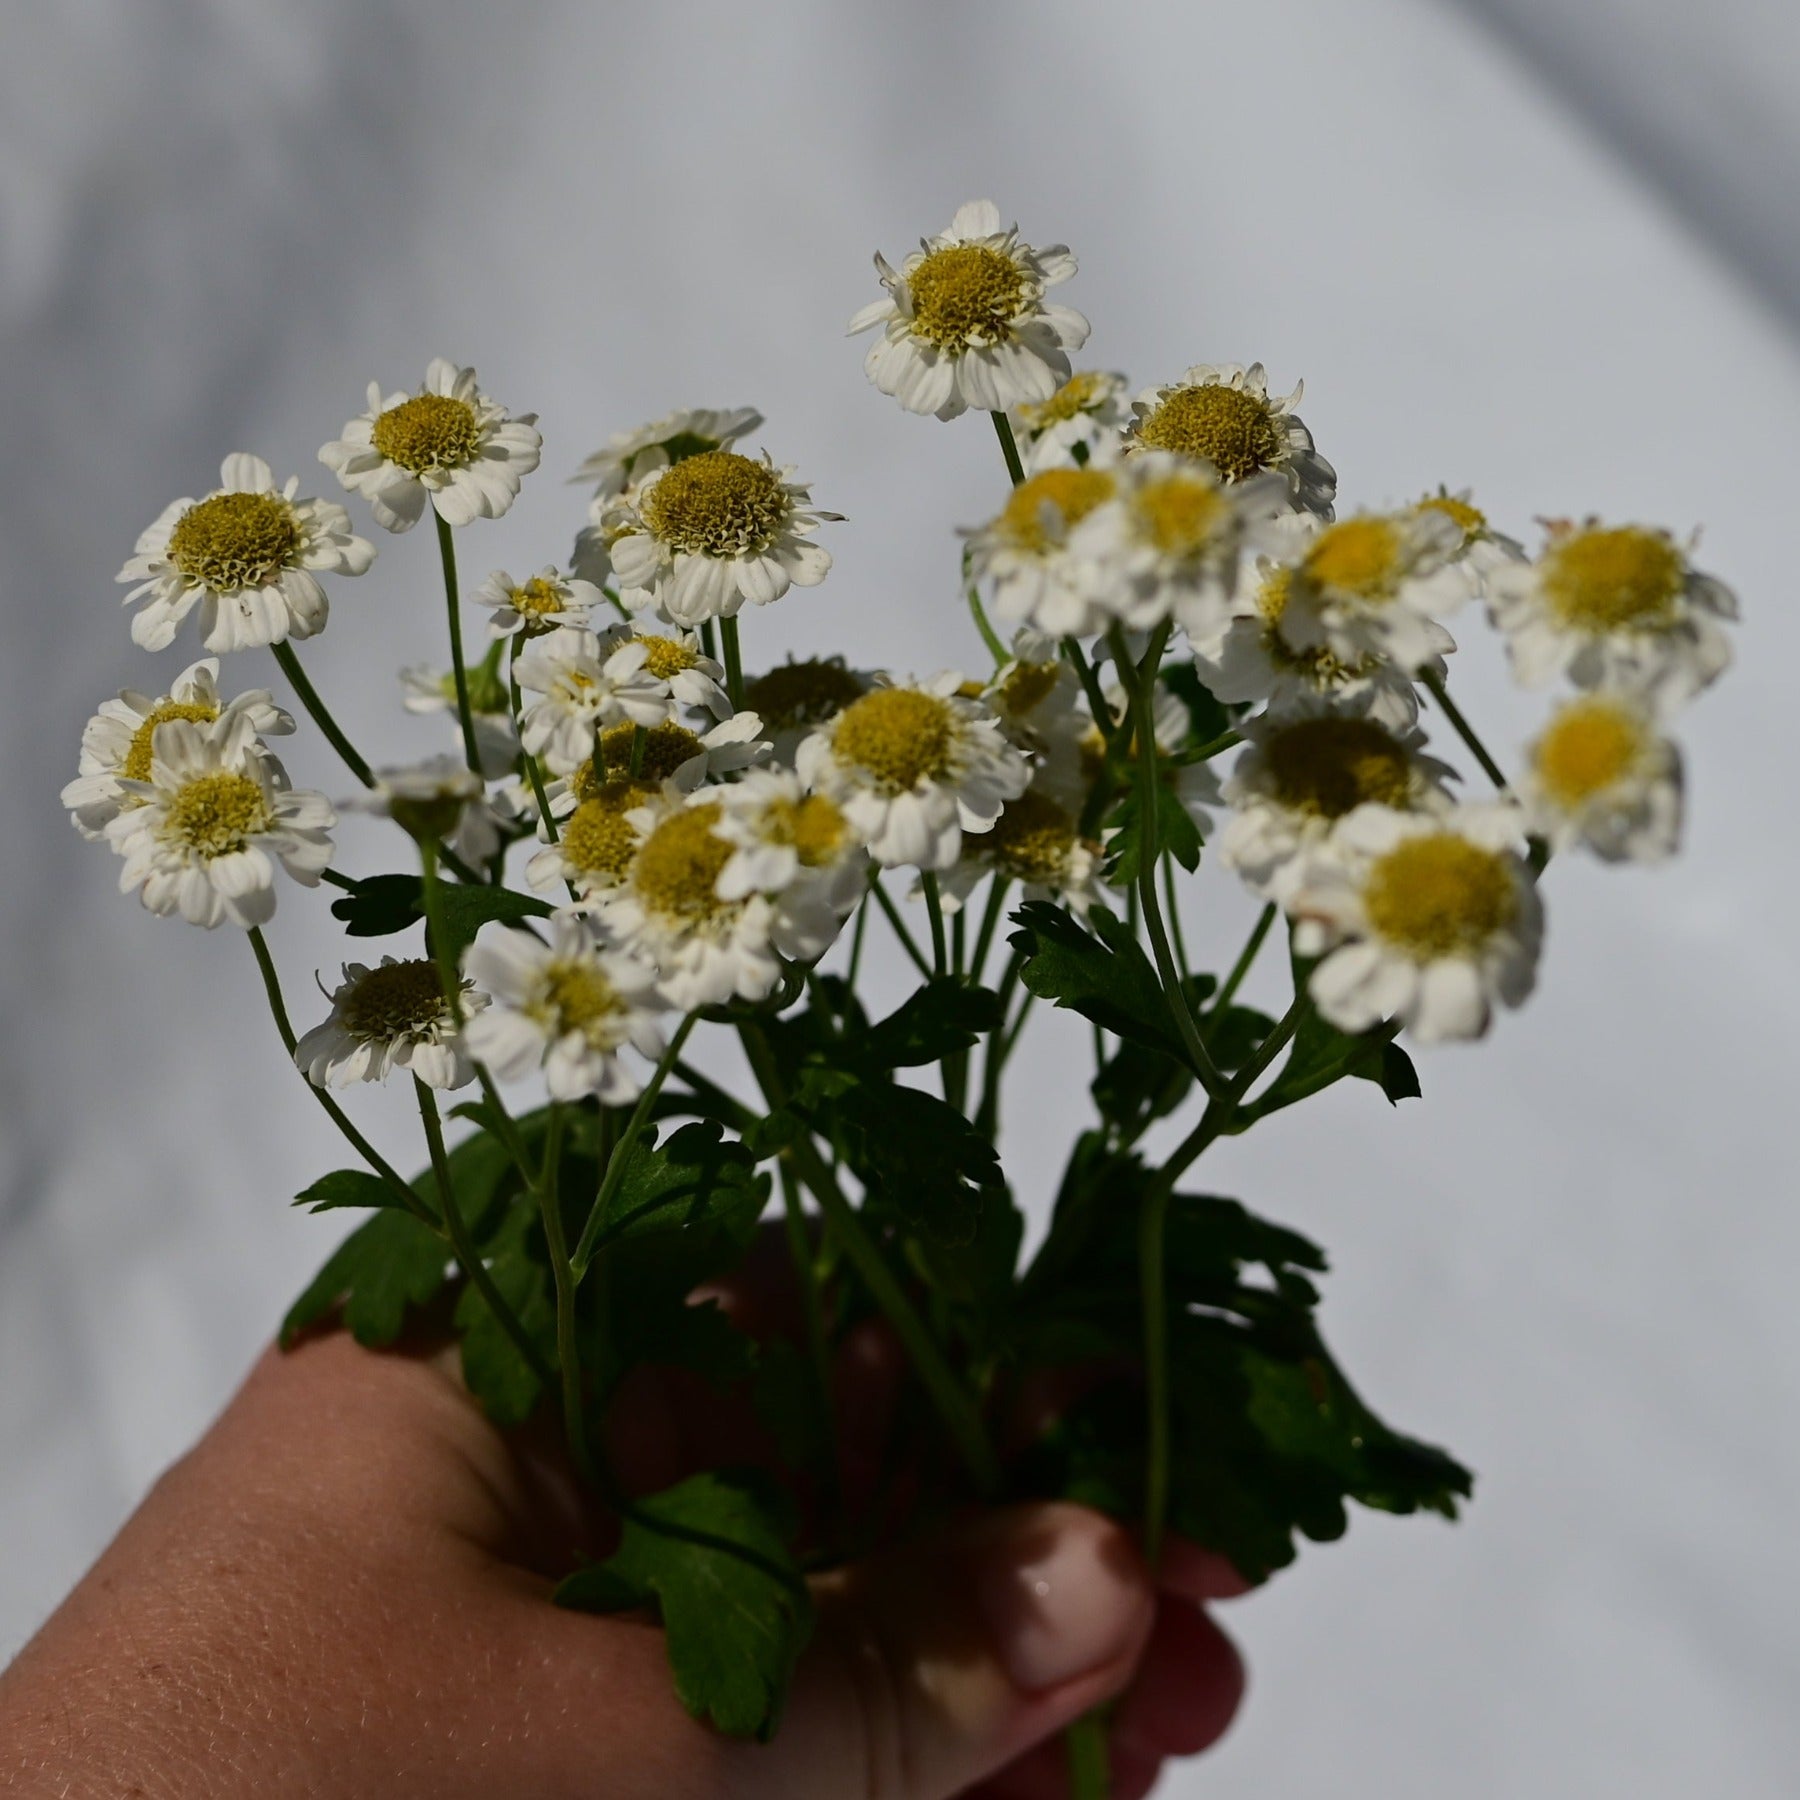 A group of magic single matricaria, also known as feverfew, blooms held in a hand against a white background